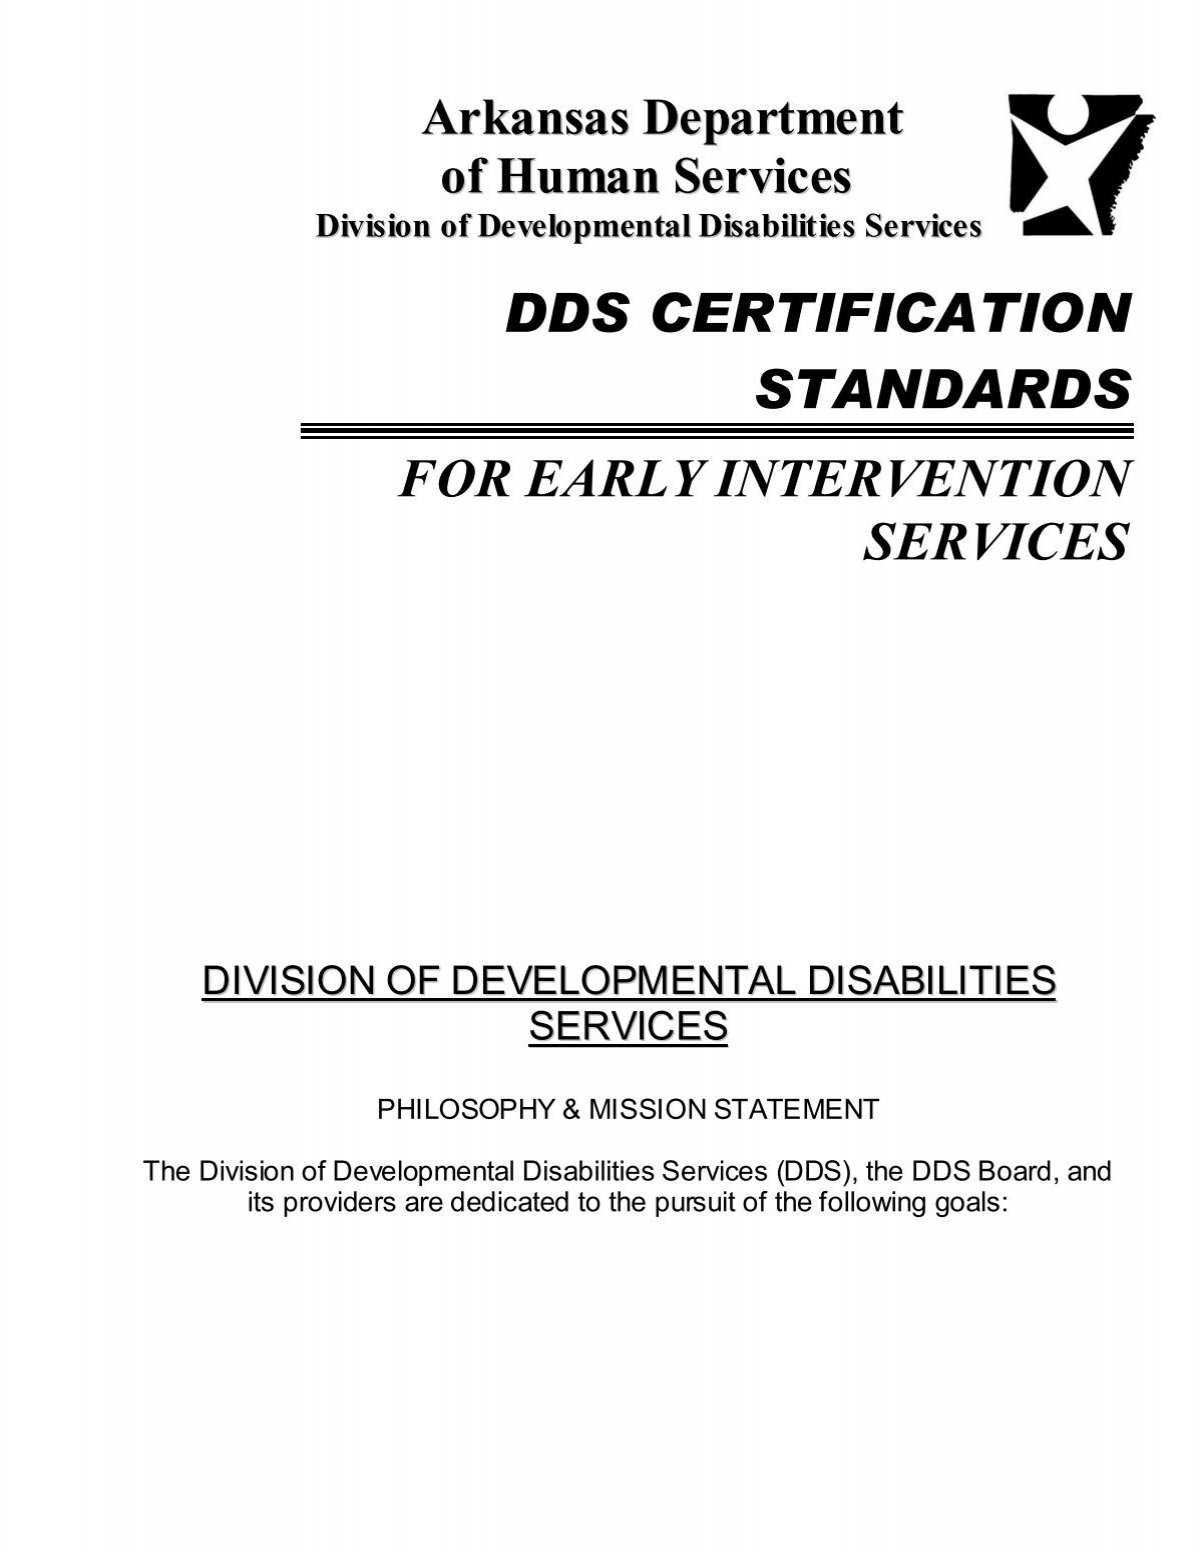 dds certification standards for early intervention services Arkansas